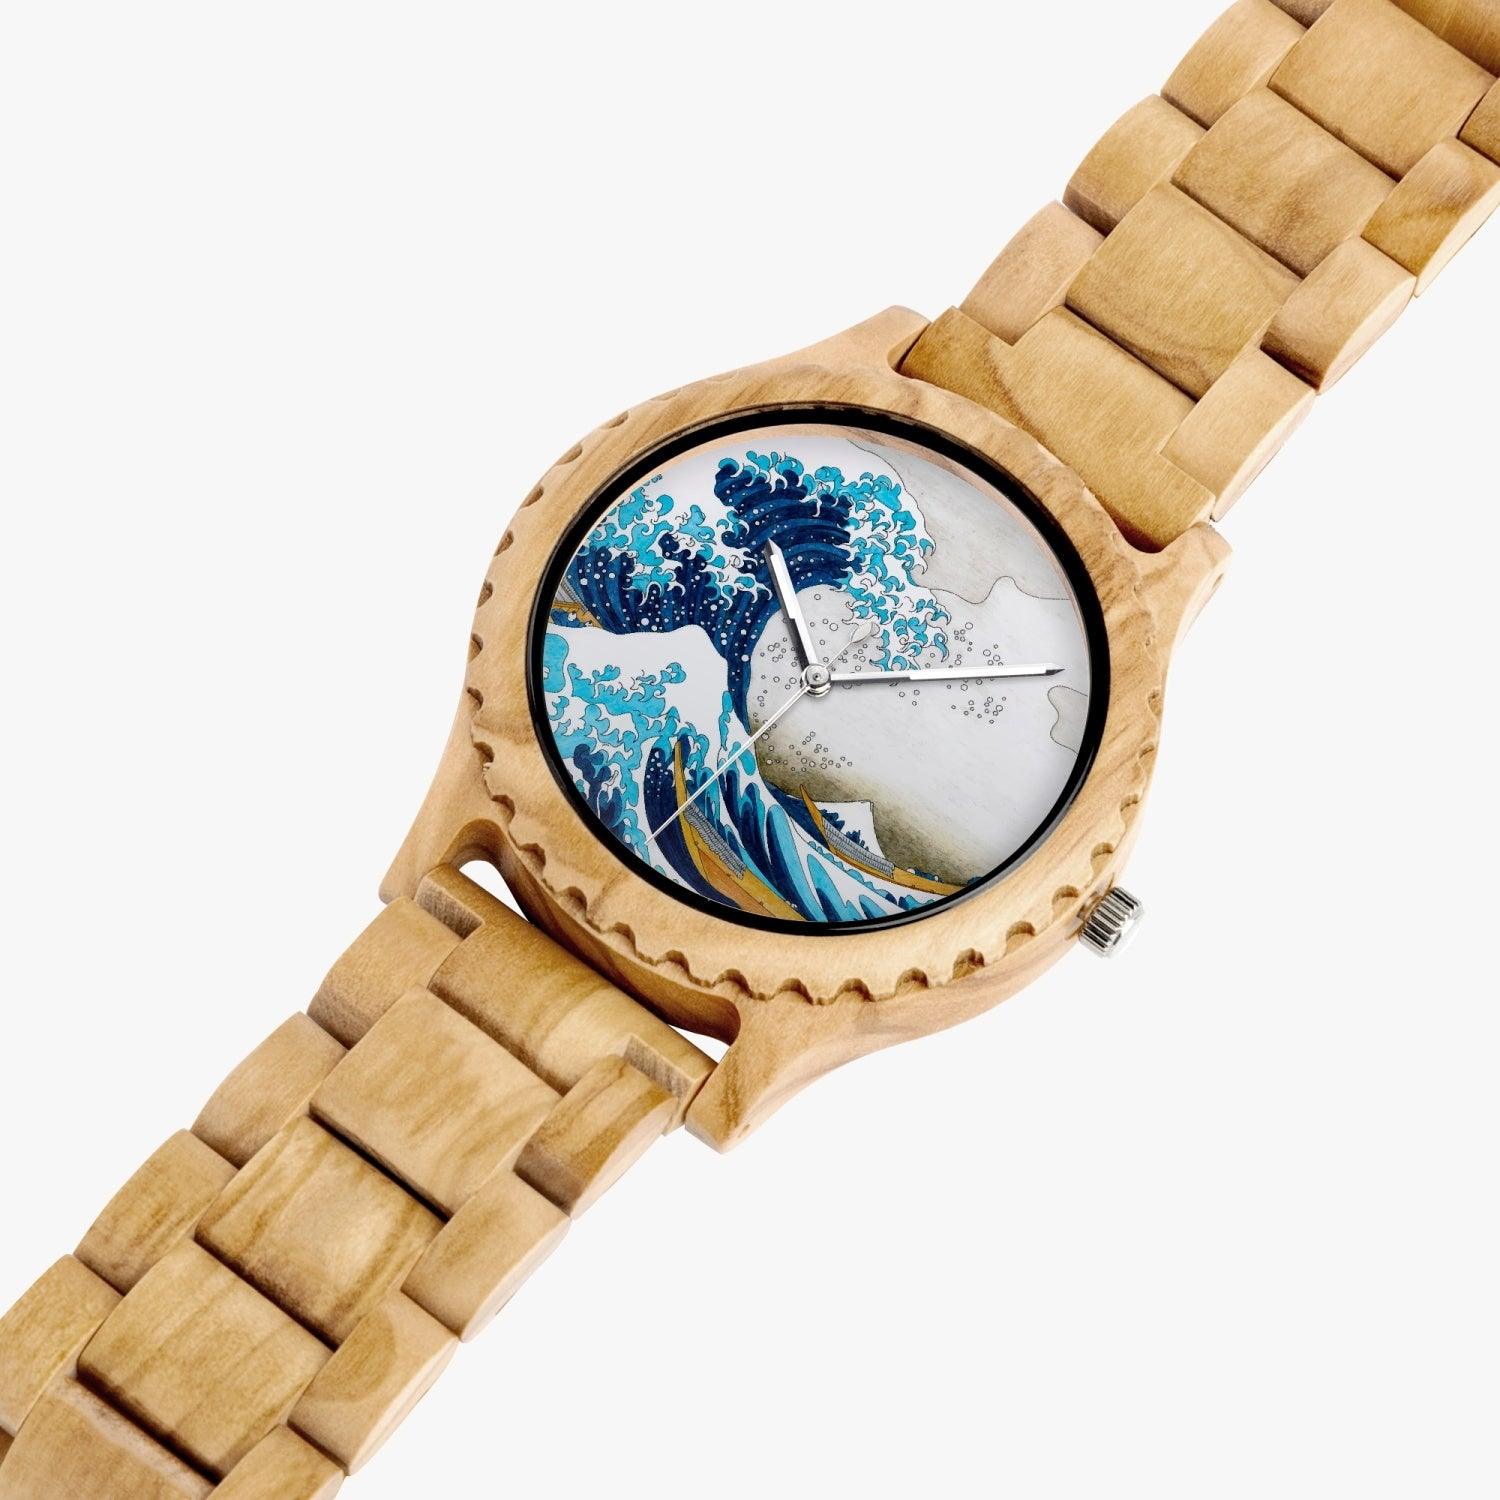 The Great Wave Wooden Watch